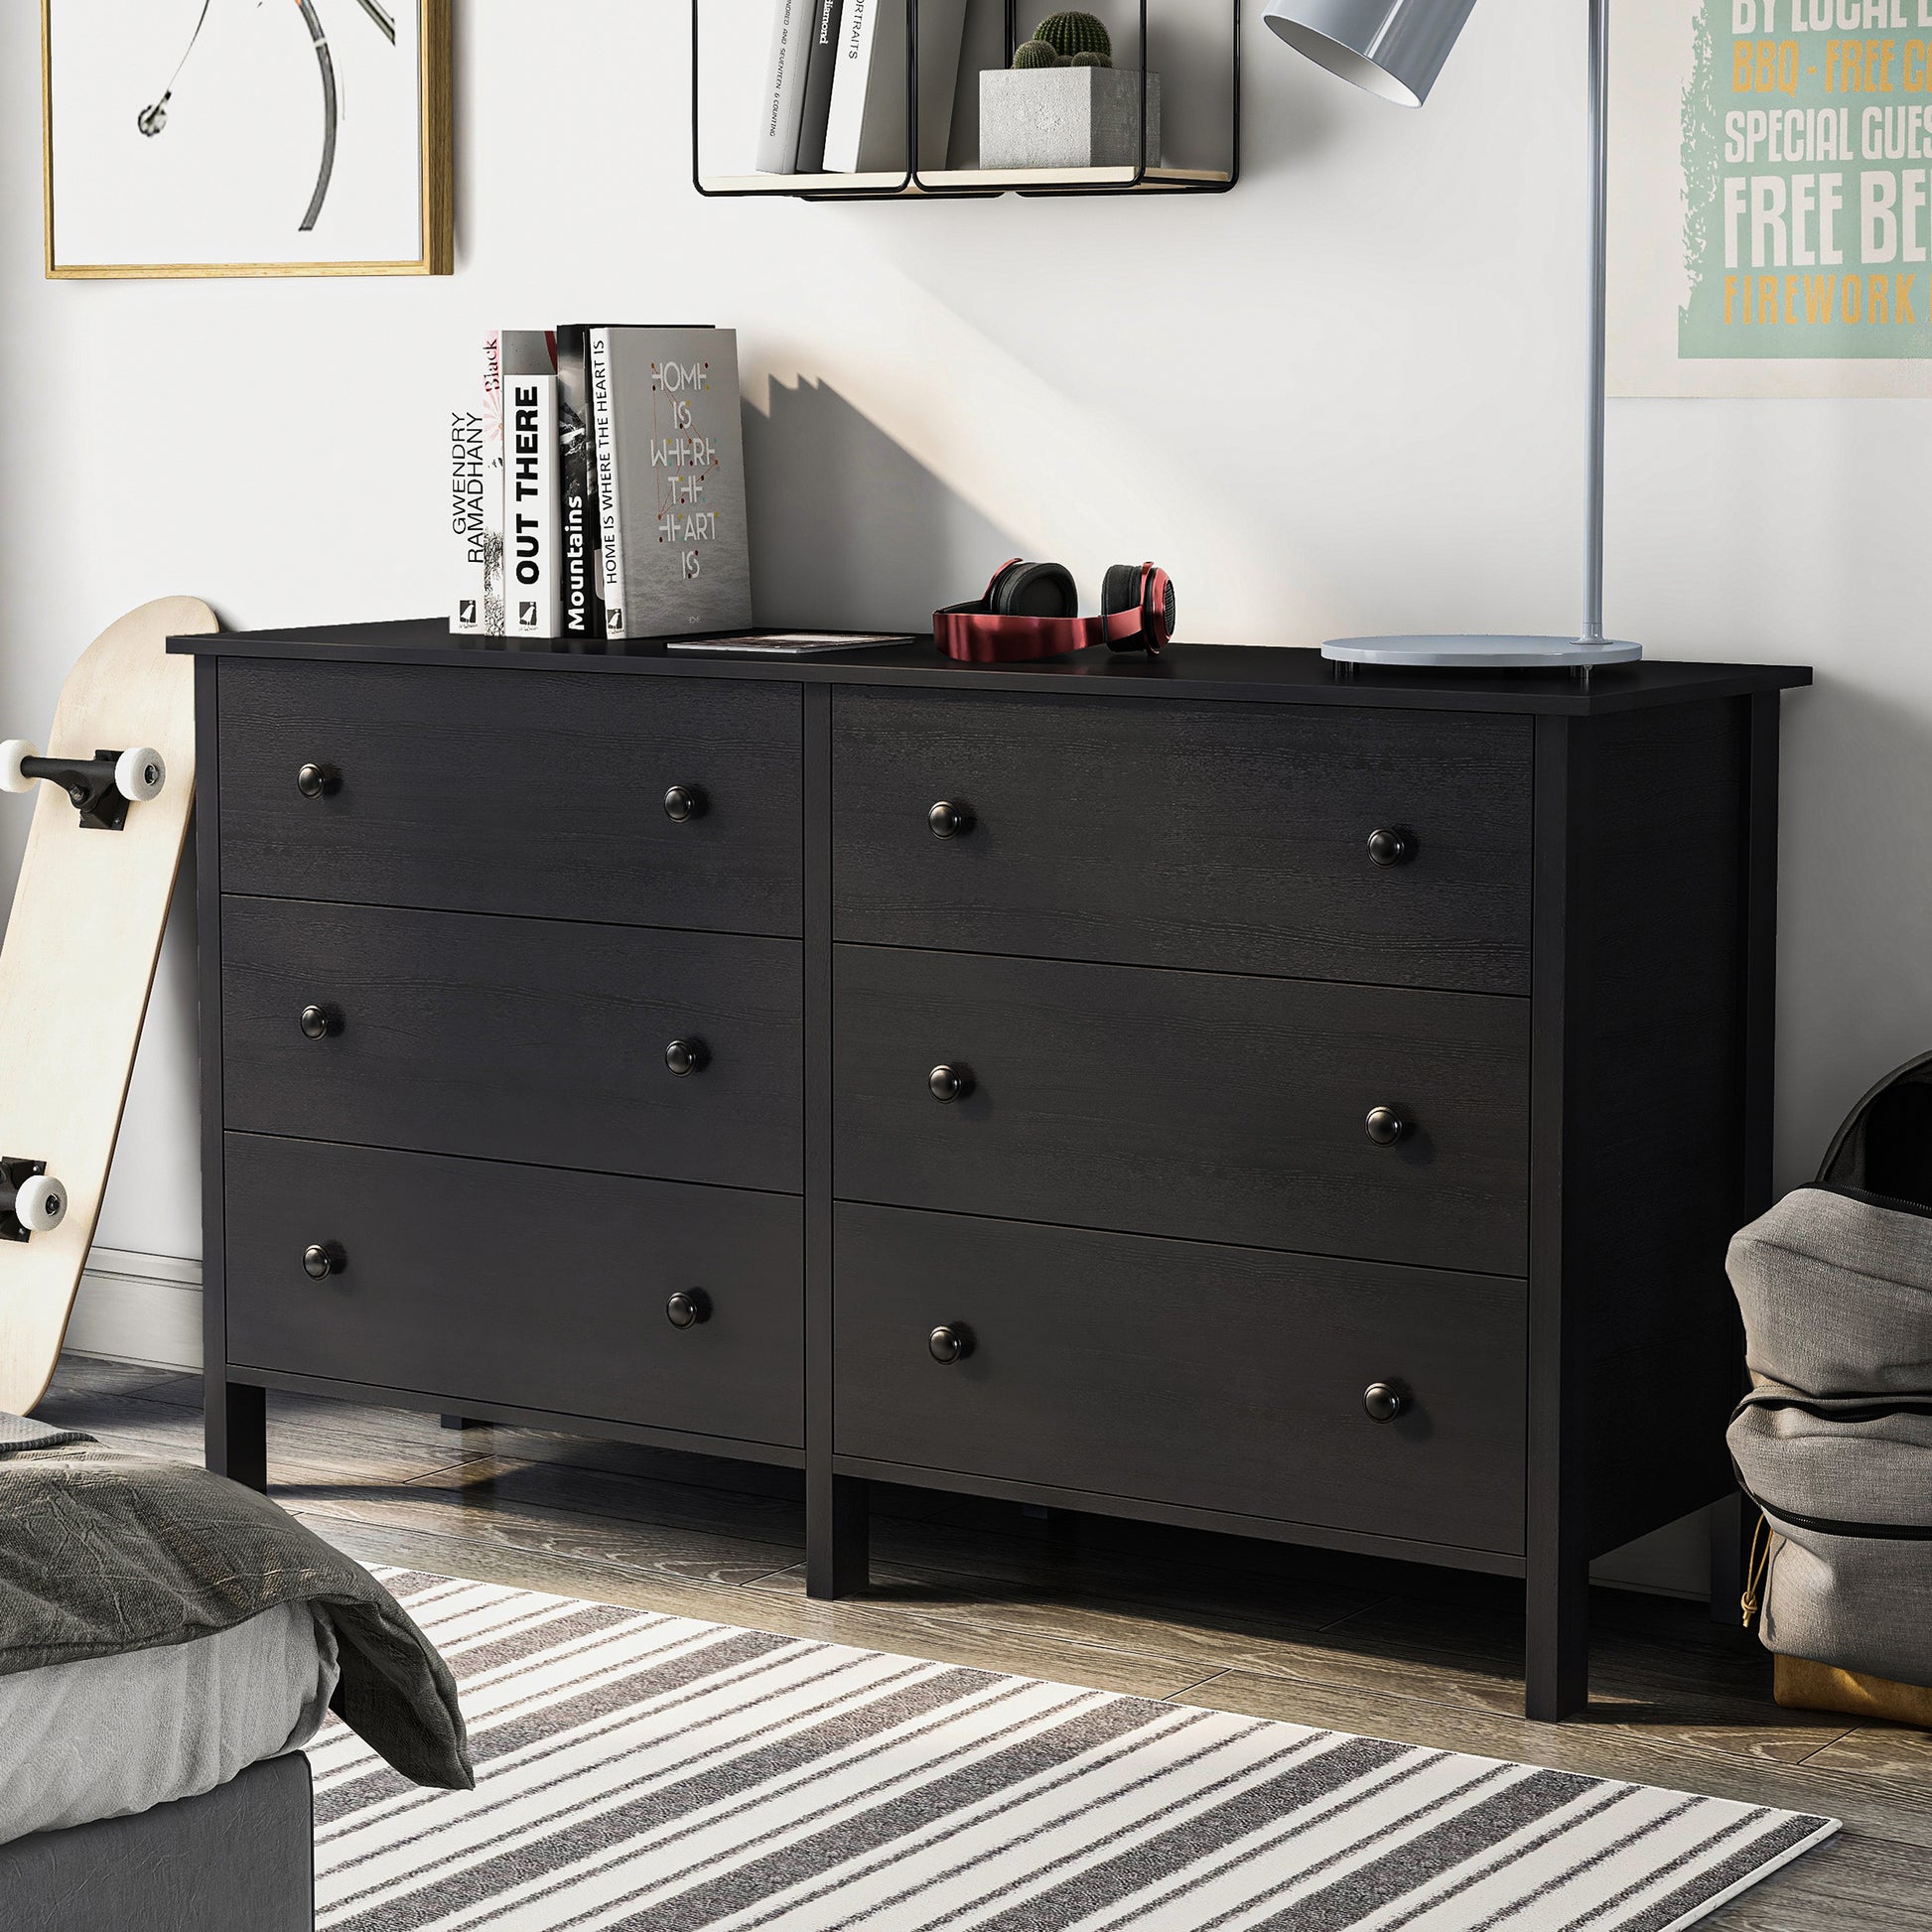 Left angled transitional black six-drawer youth dresser in a bedroom with accessories